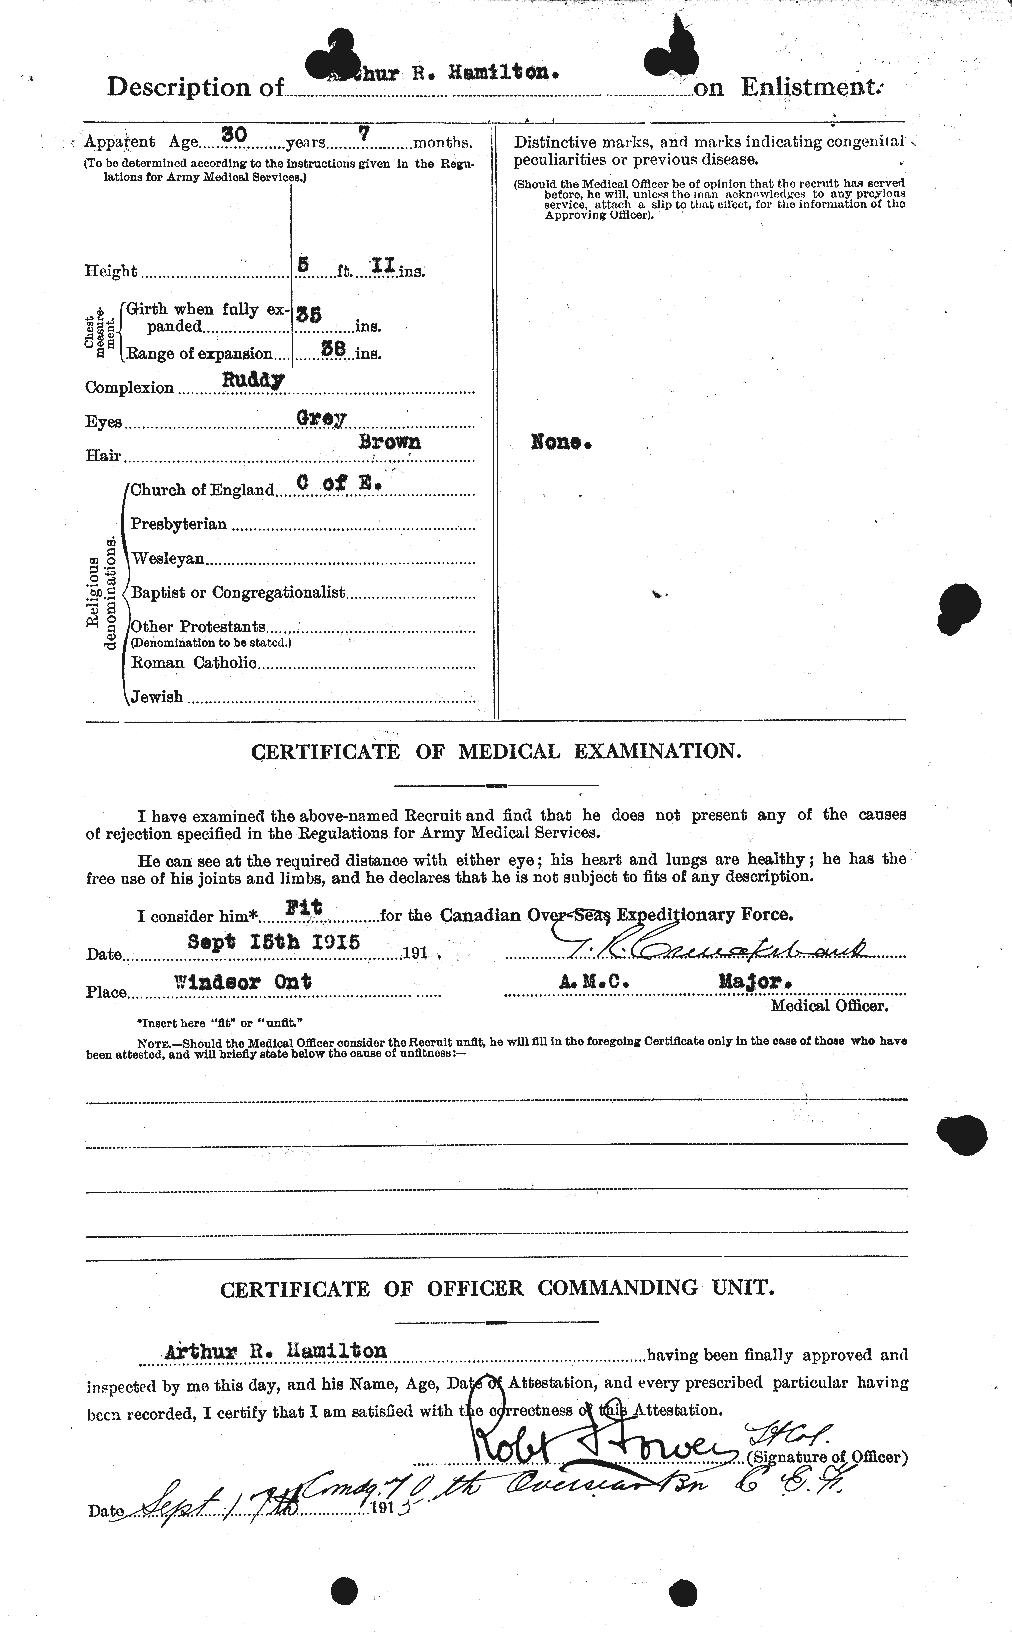 Personnel Records of the First World War - CEF 375252b